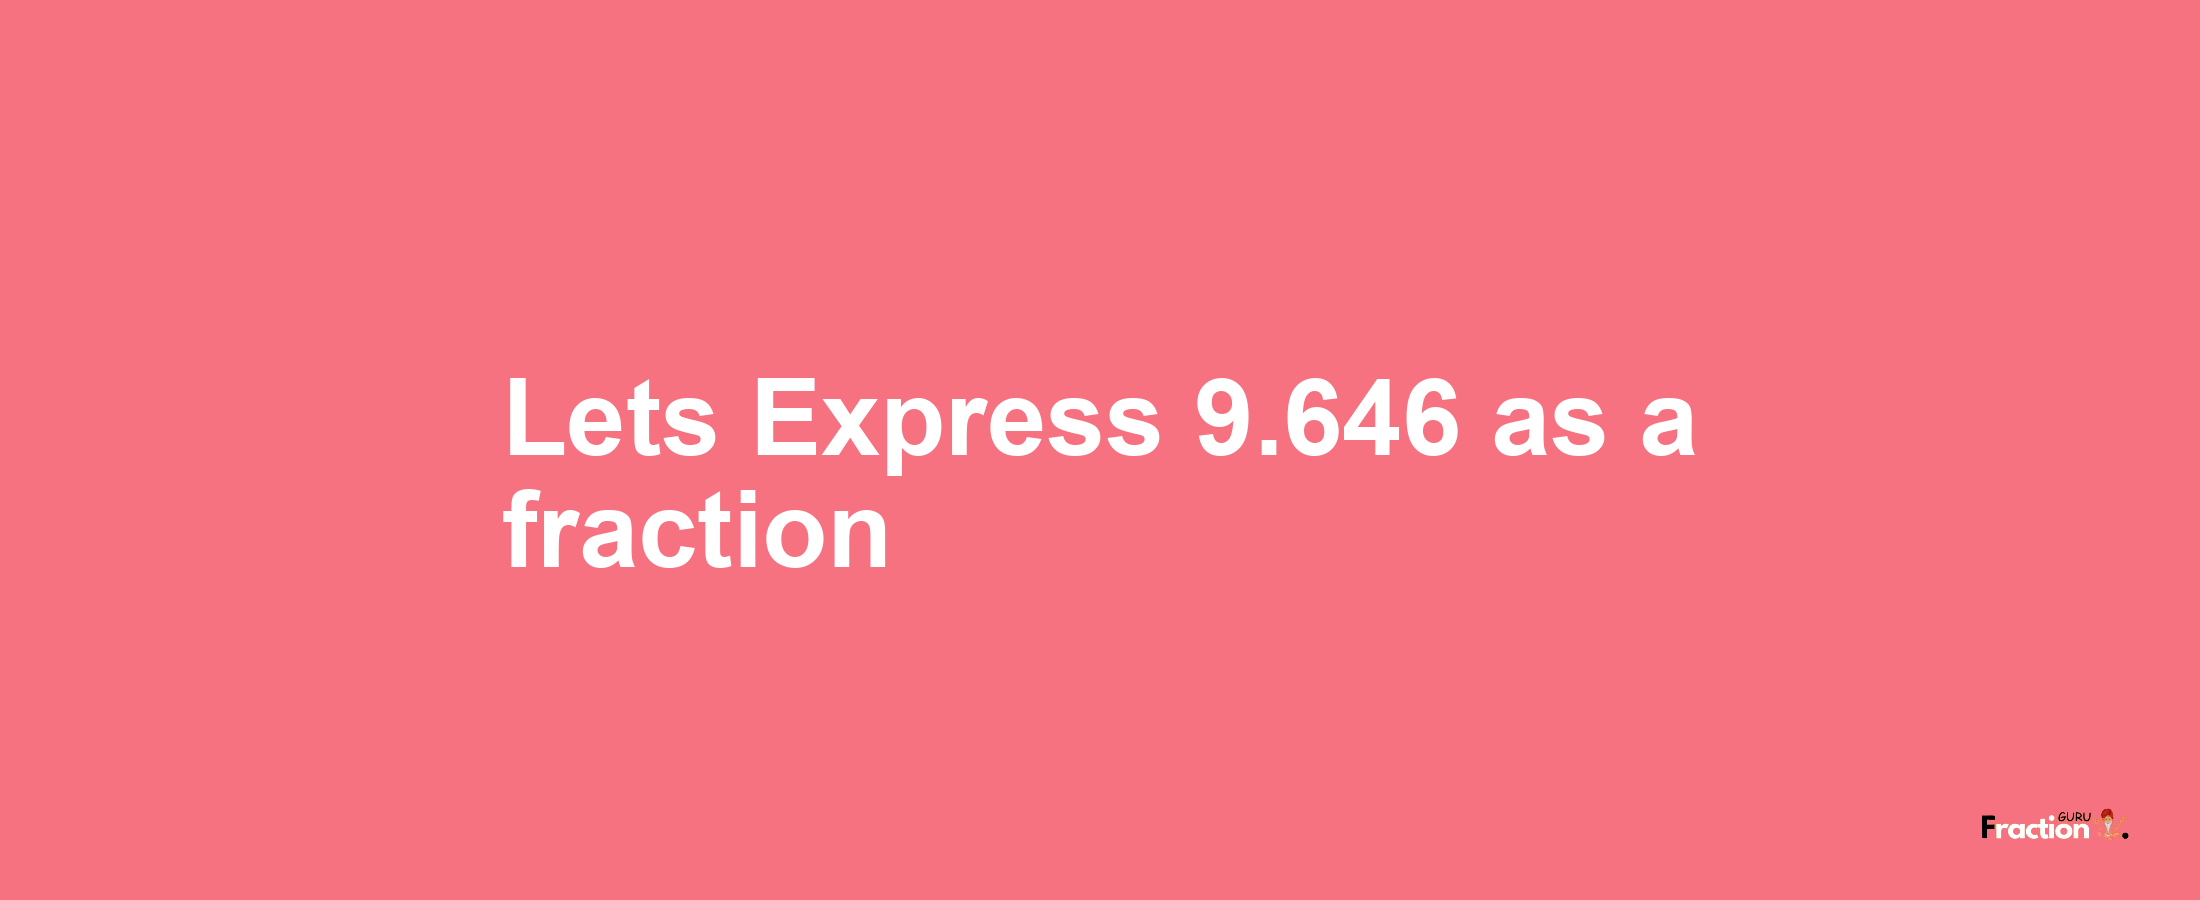 Lets Express 9.646 as afraction